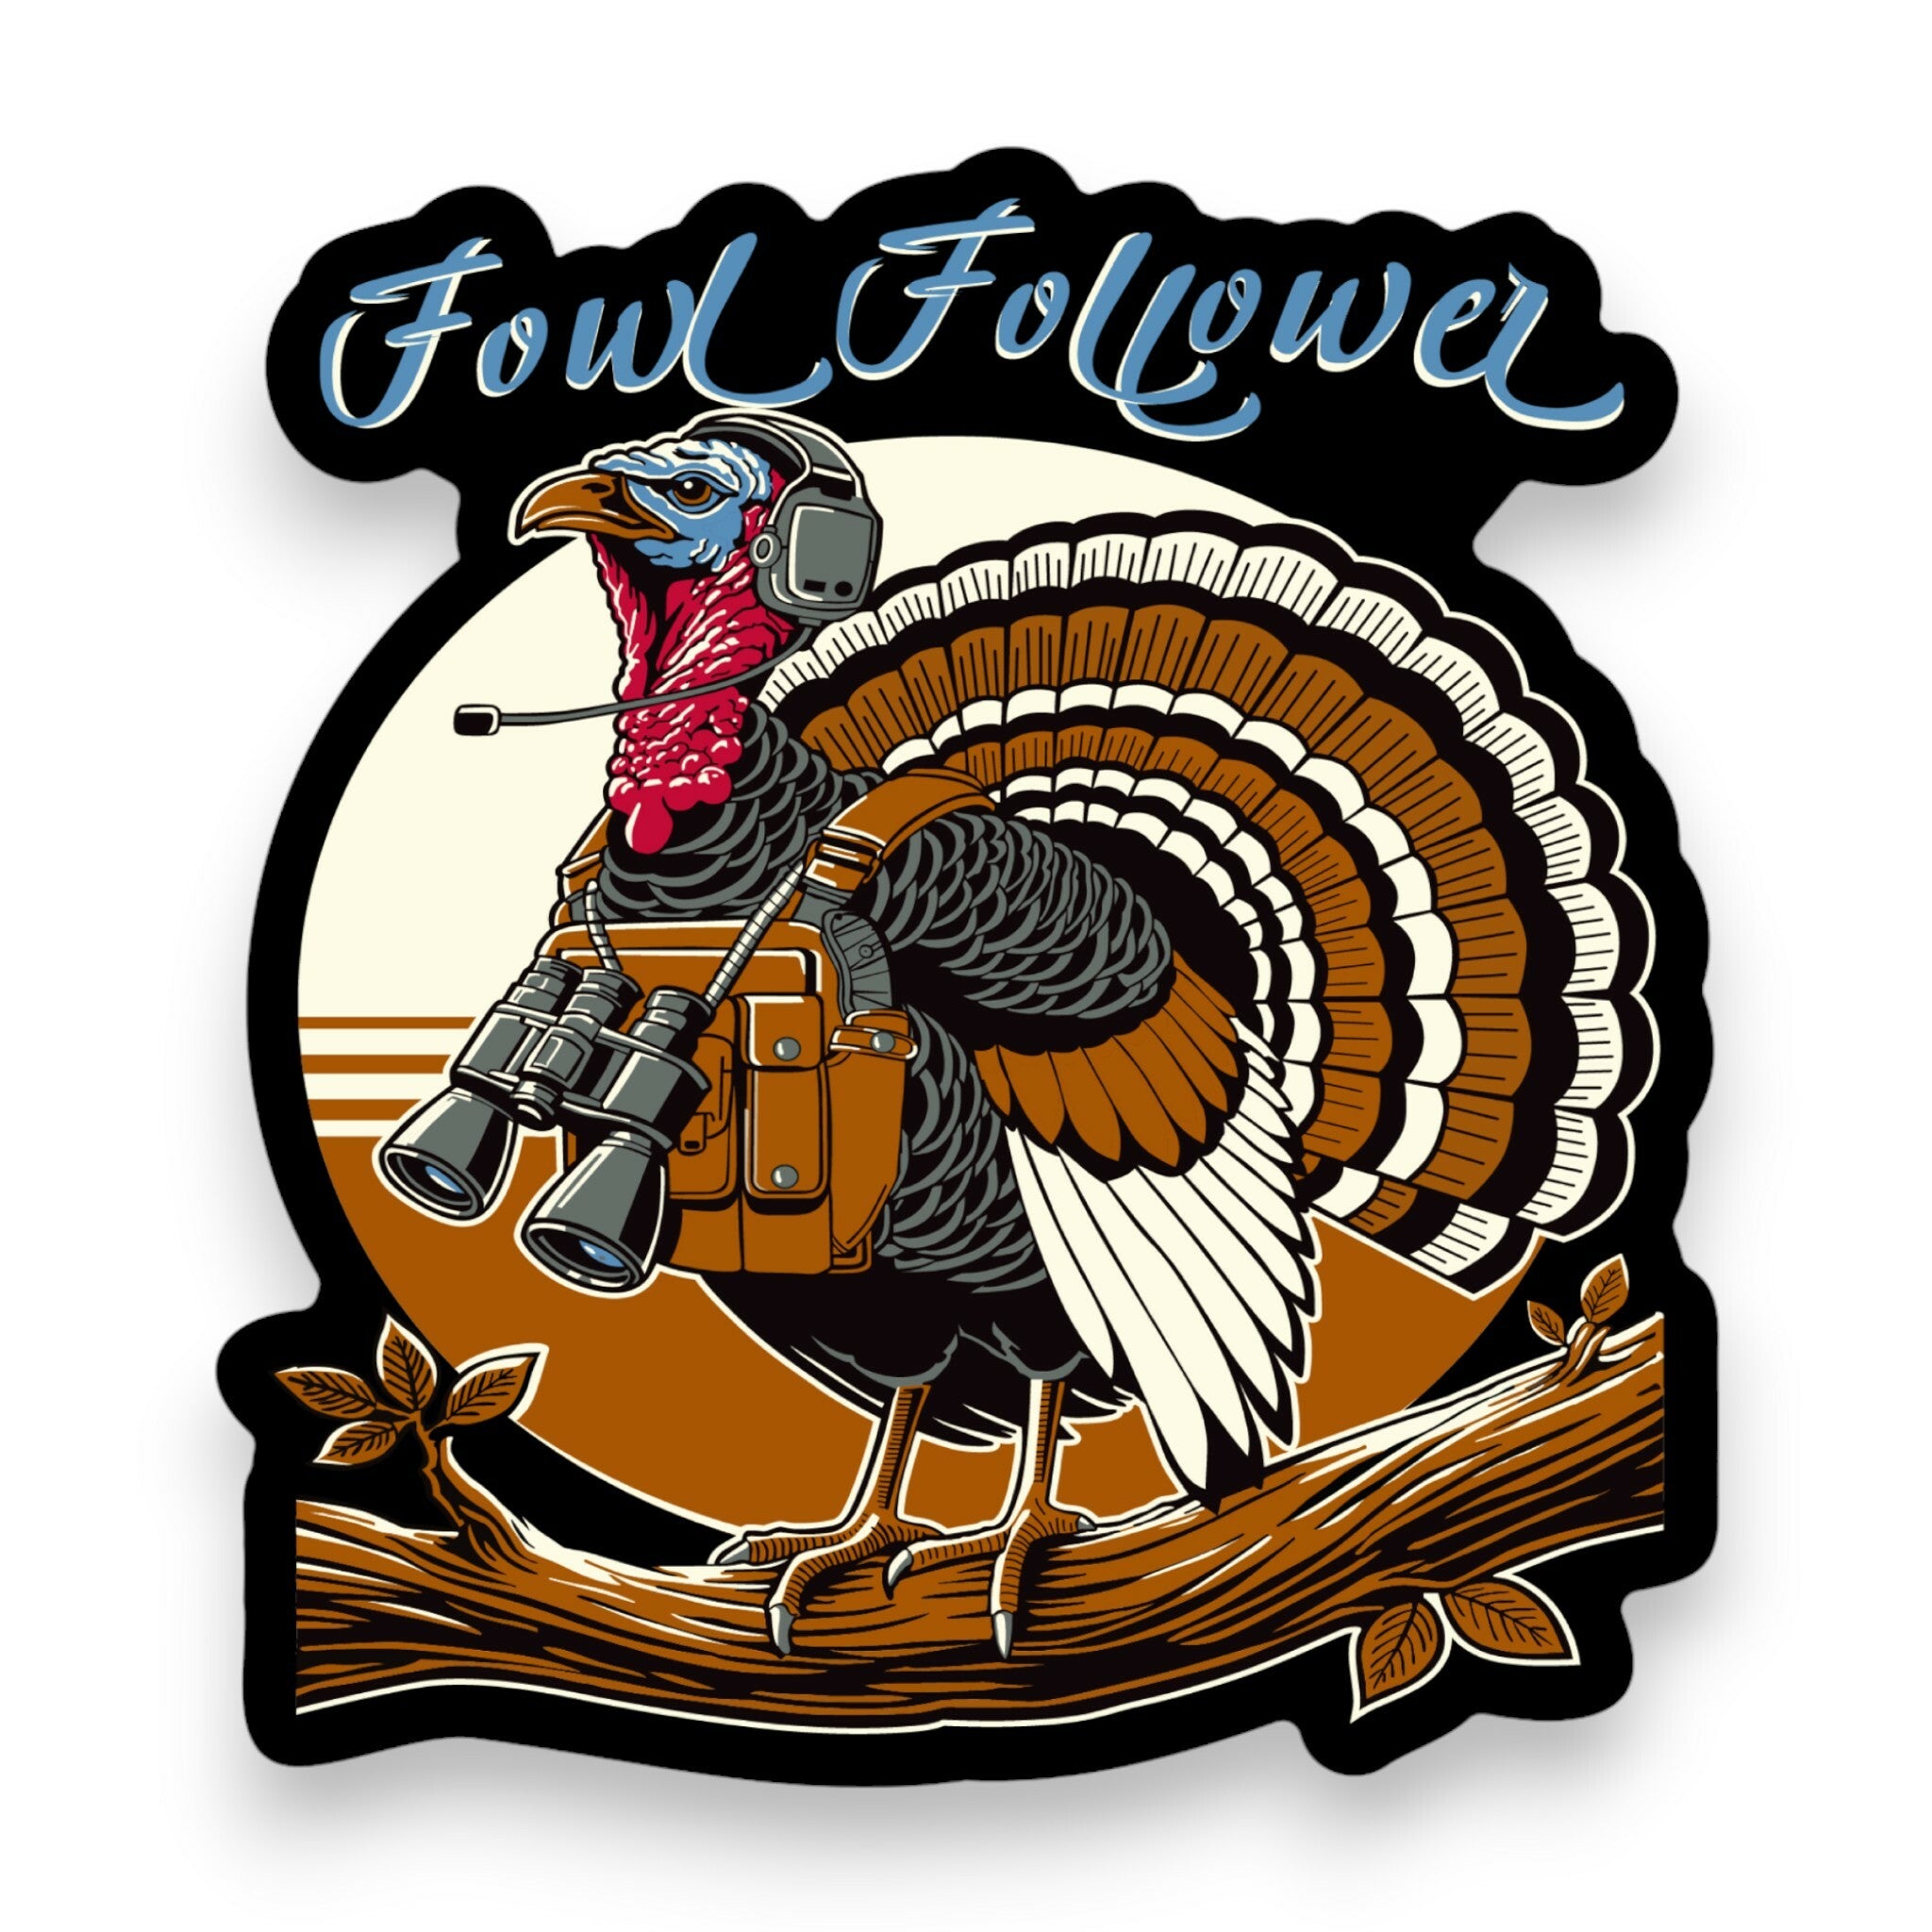  "Tacticool Tom Sticker" by Fowl Follower, featuring a cartoon turkey equipped with tactical gear, ideal for turkey hunters looking to add a humorous touch to their hunting equipment.